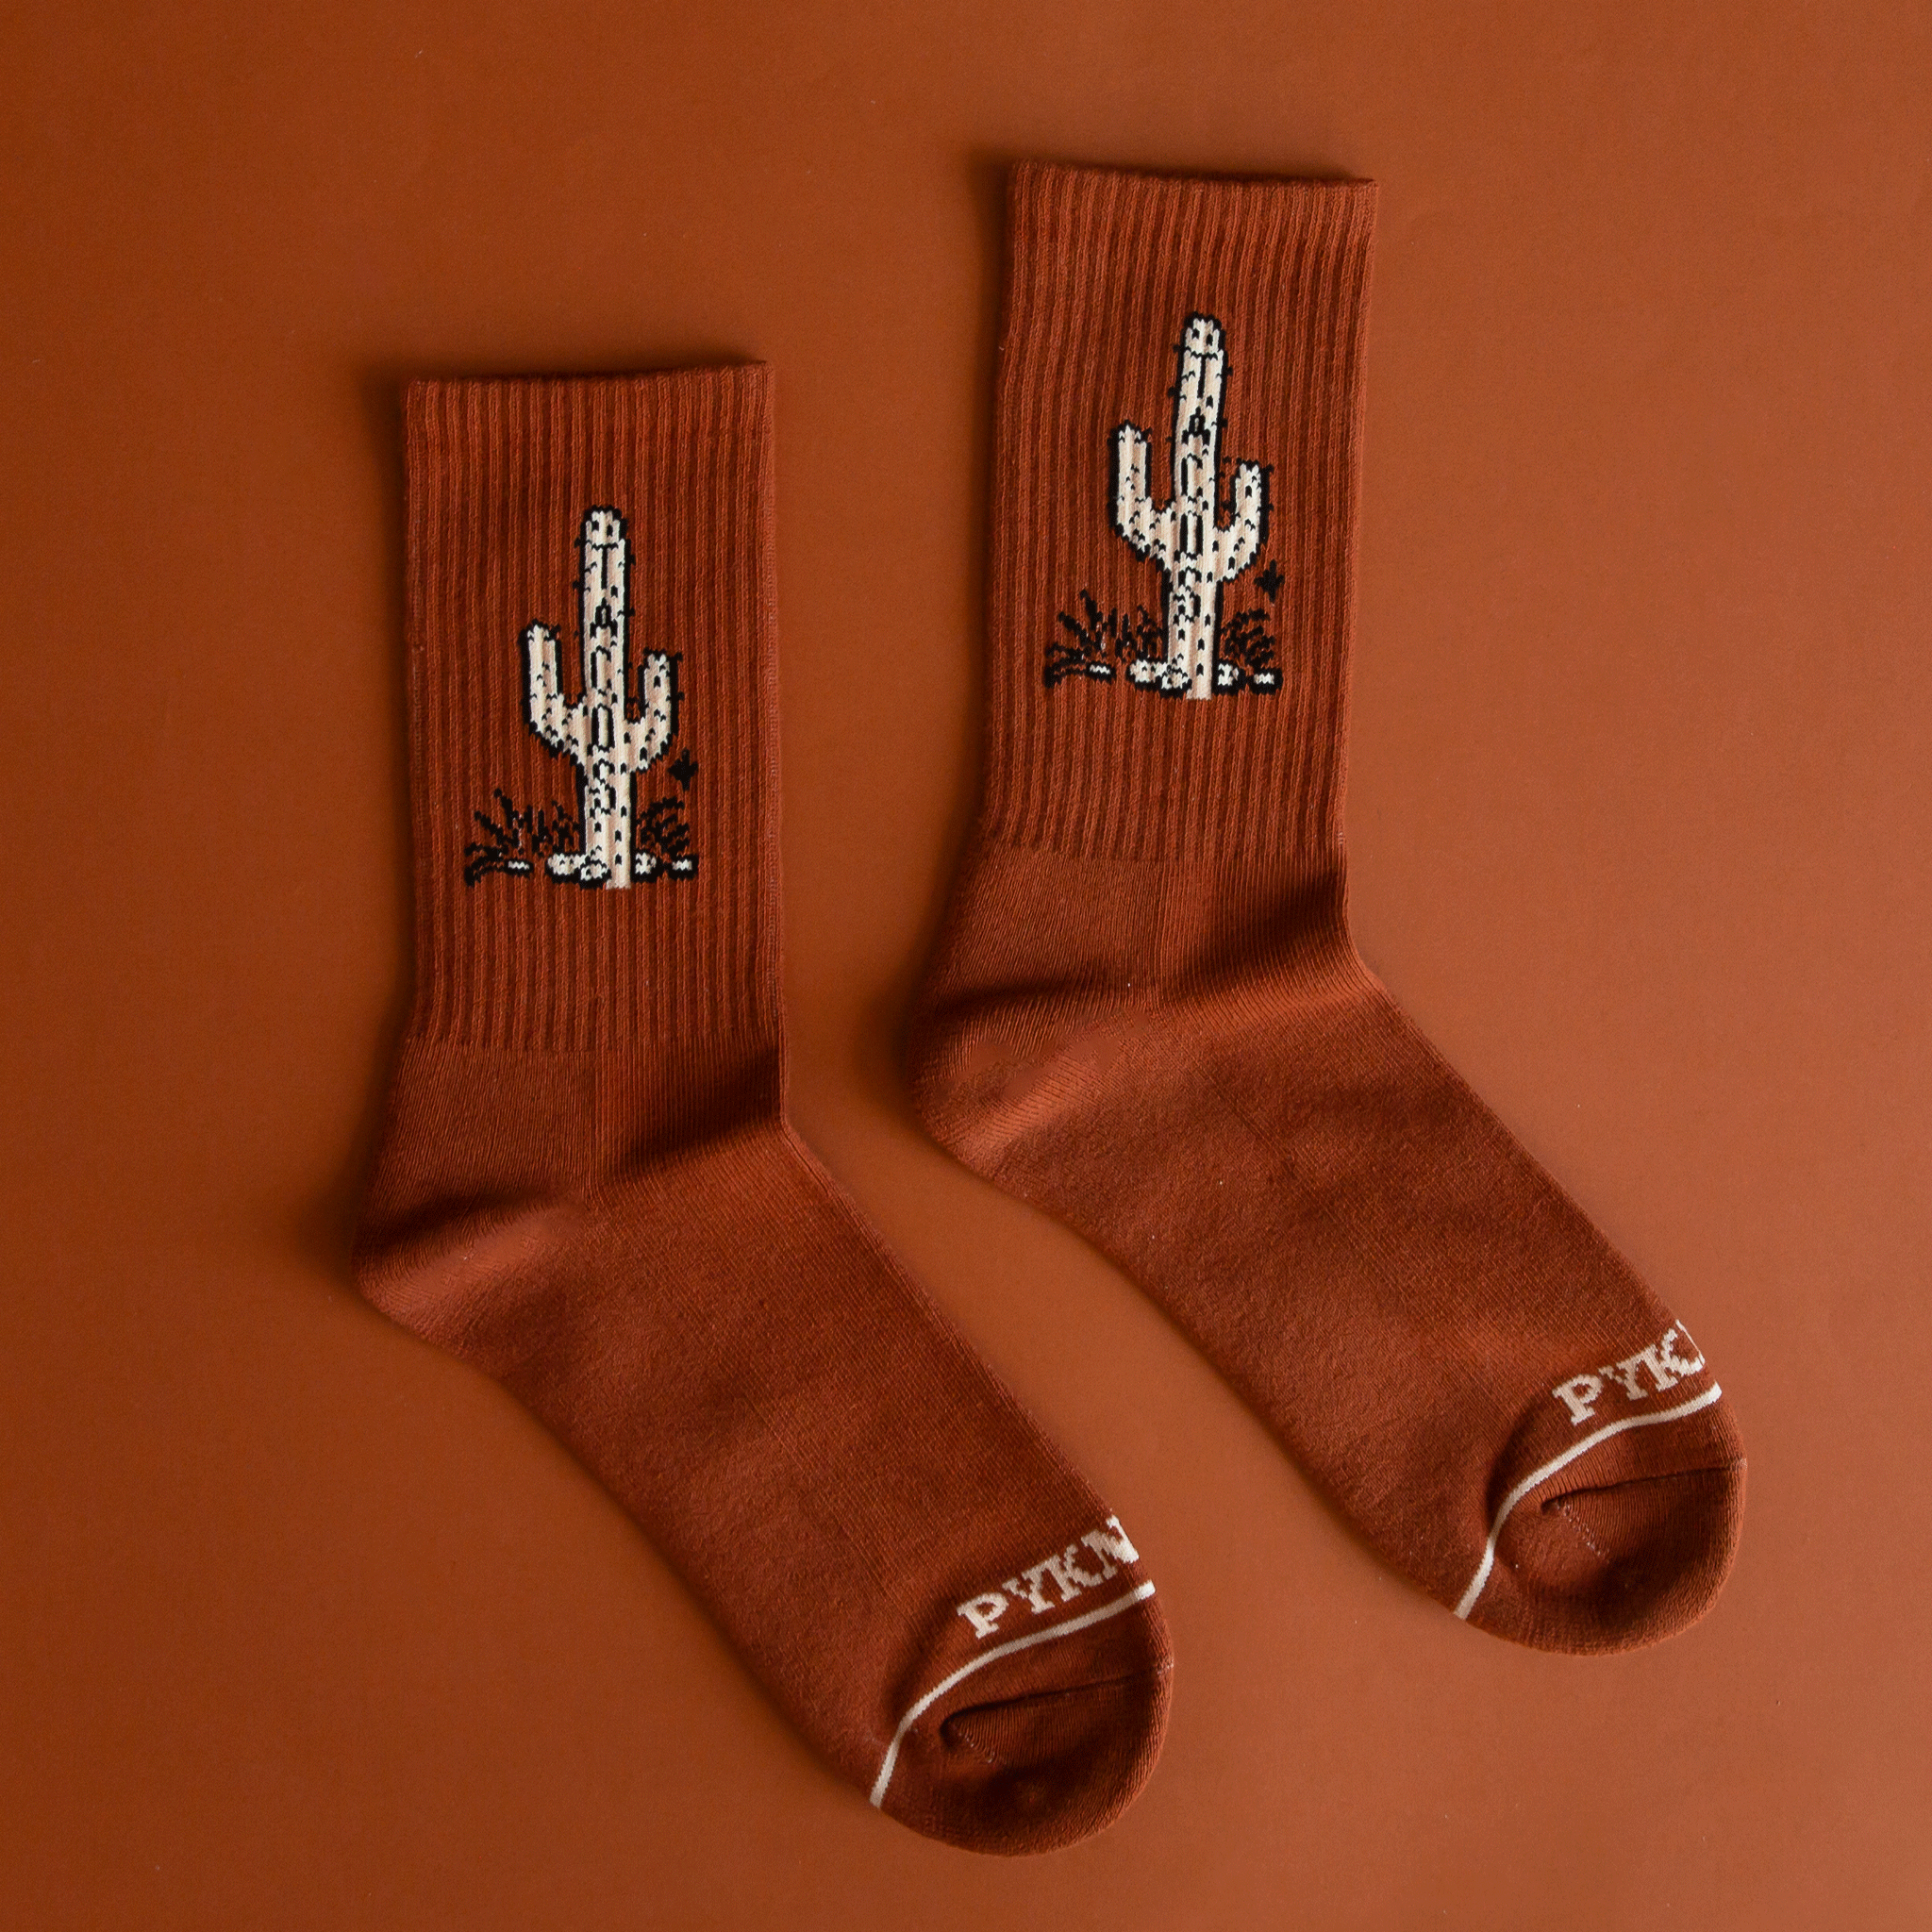 A burnt orange / brown socks with a cactus graphic with &quot;Taco&quot; written down the side of the cactus.